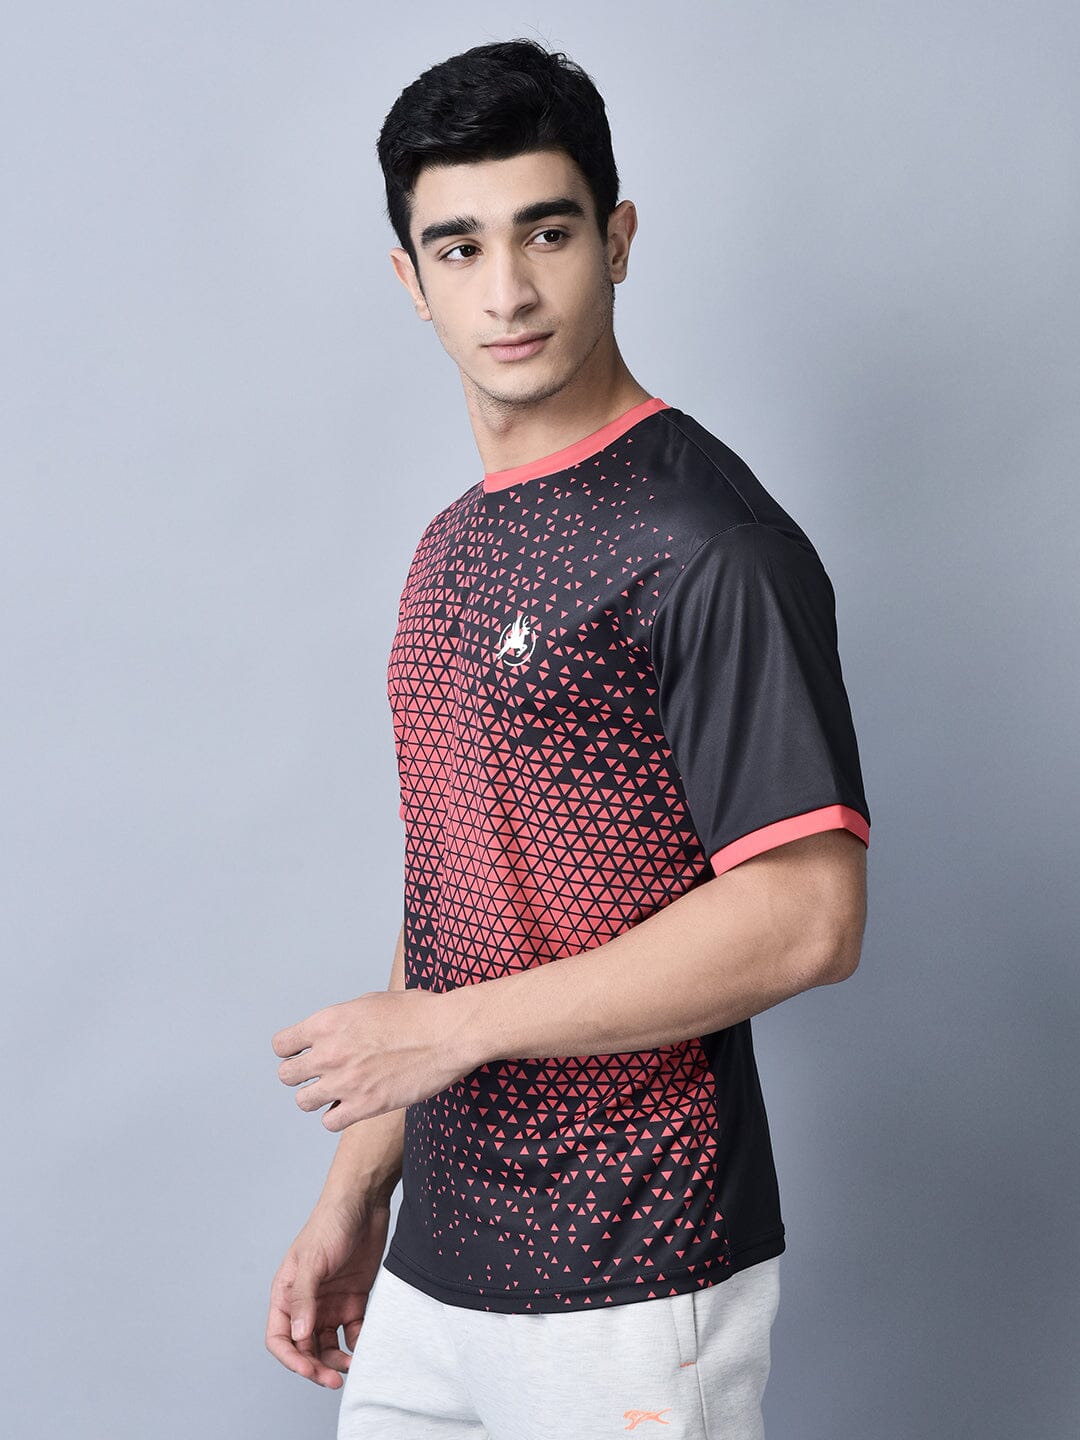 Ready-to-Play Jersey Black/Red - trenz